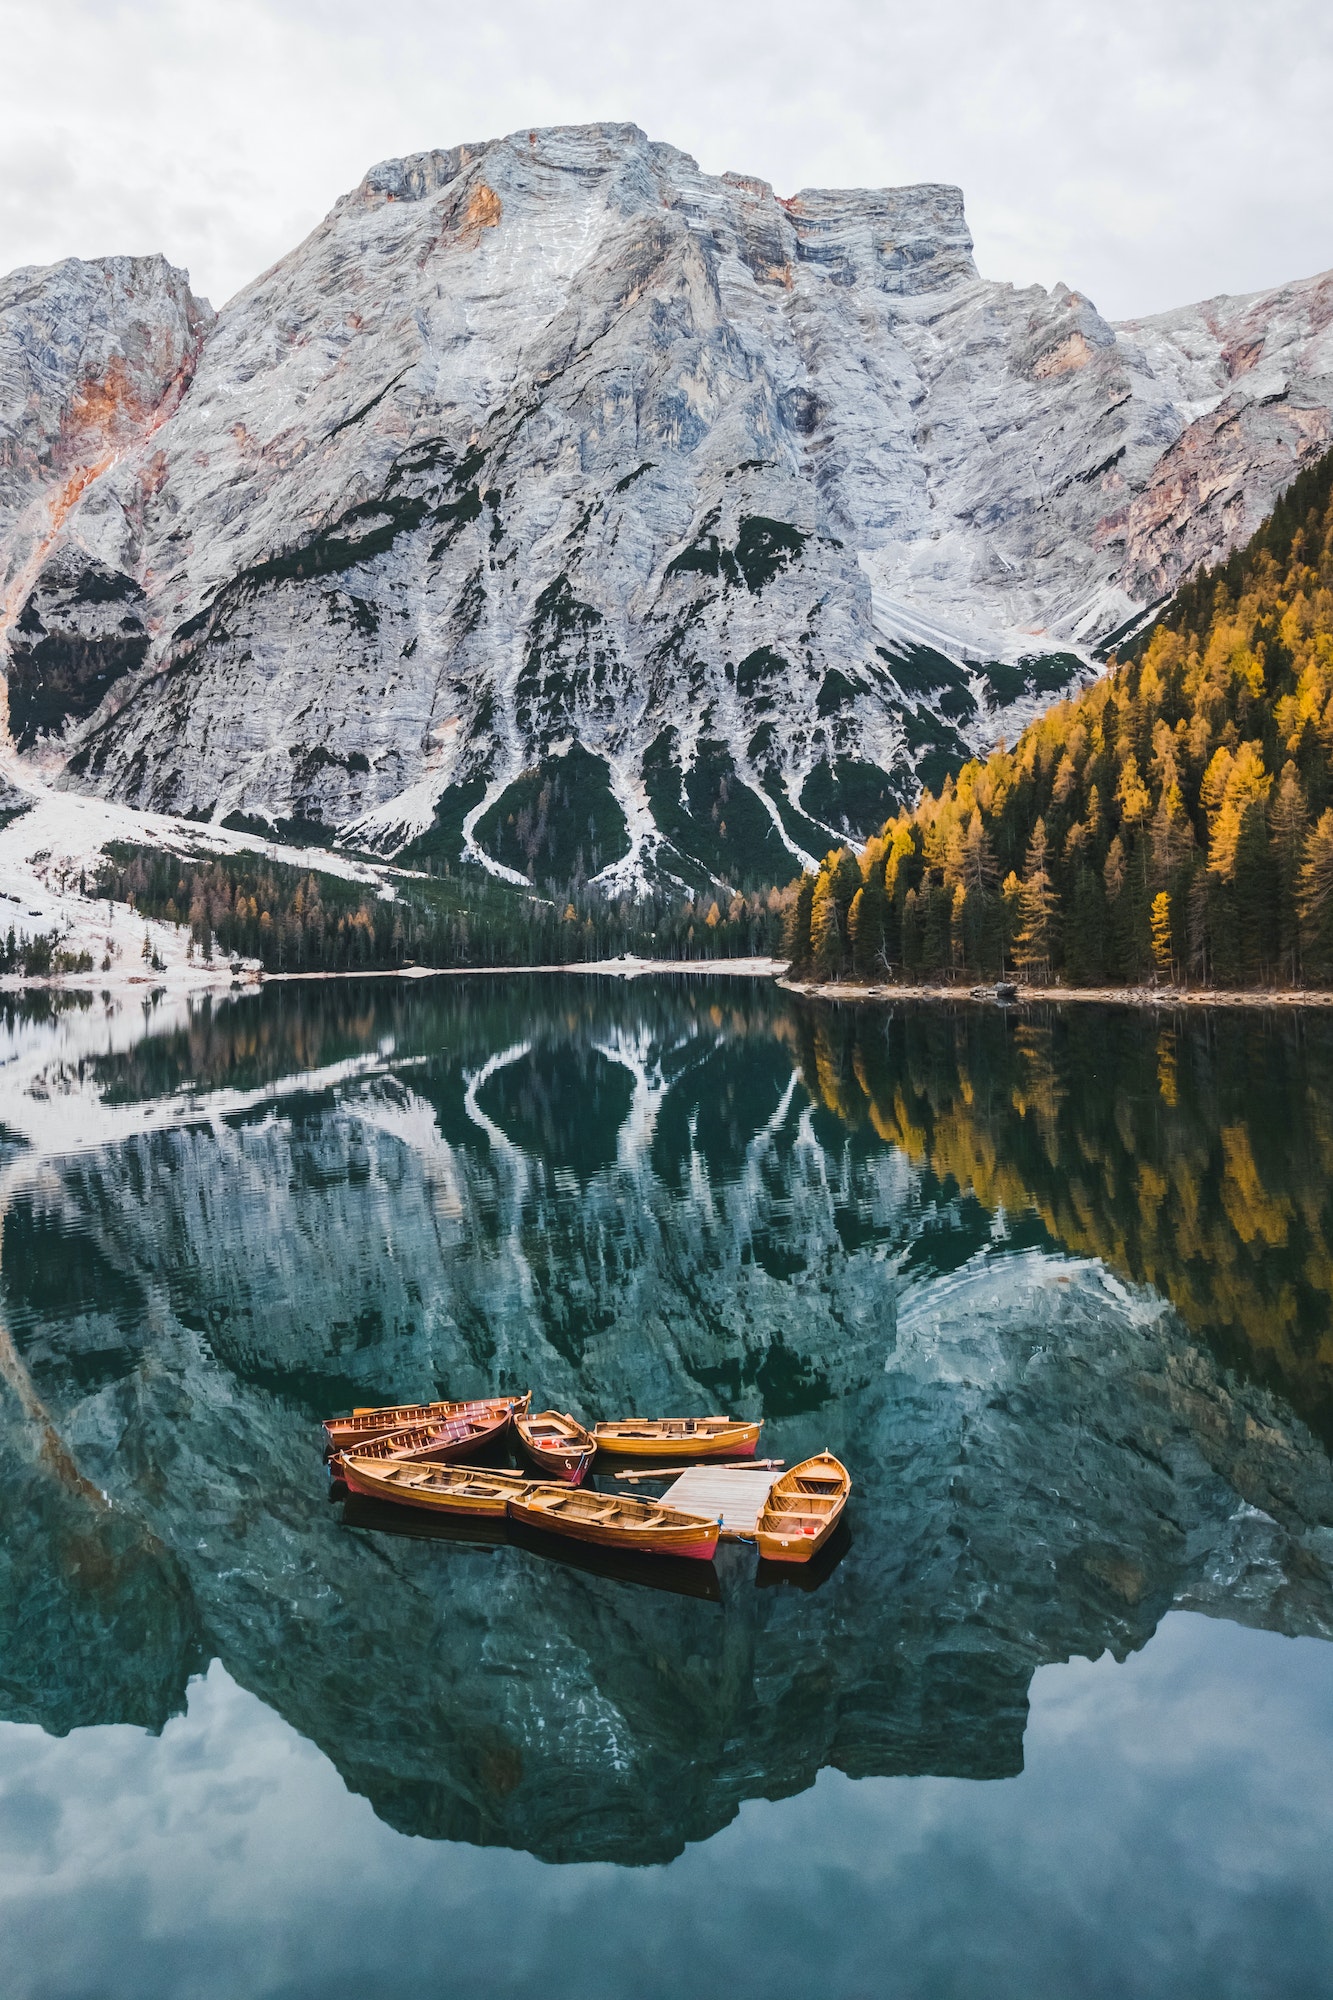 Autumn landscape of Lago di Braies Lake in italian Dolomites mountains in northern Italy.